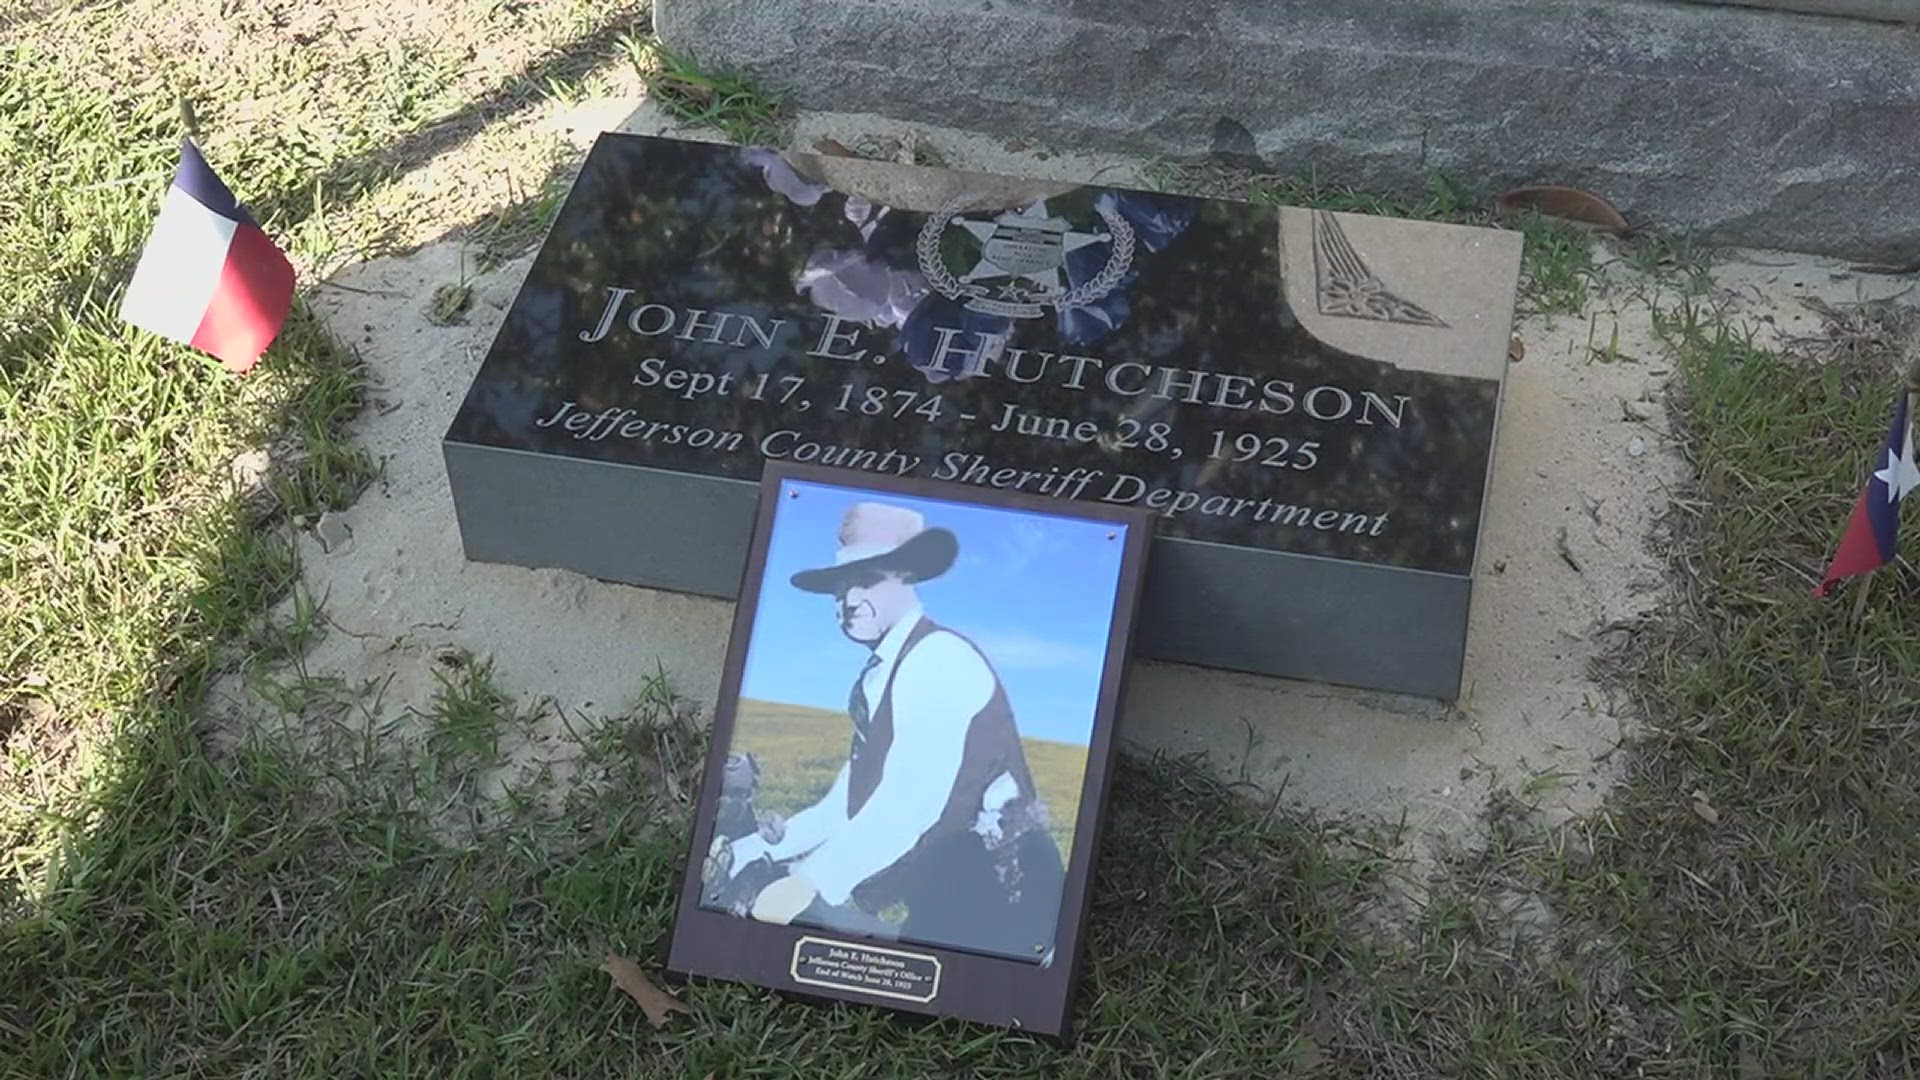 Jefferson County Deputy Sheriff John E. Hutcheson died on June 28, 1925 after being shot with his own revolver by an inmate at the county jail.